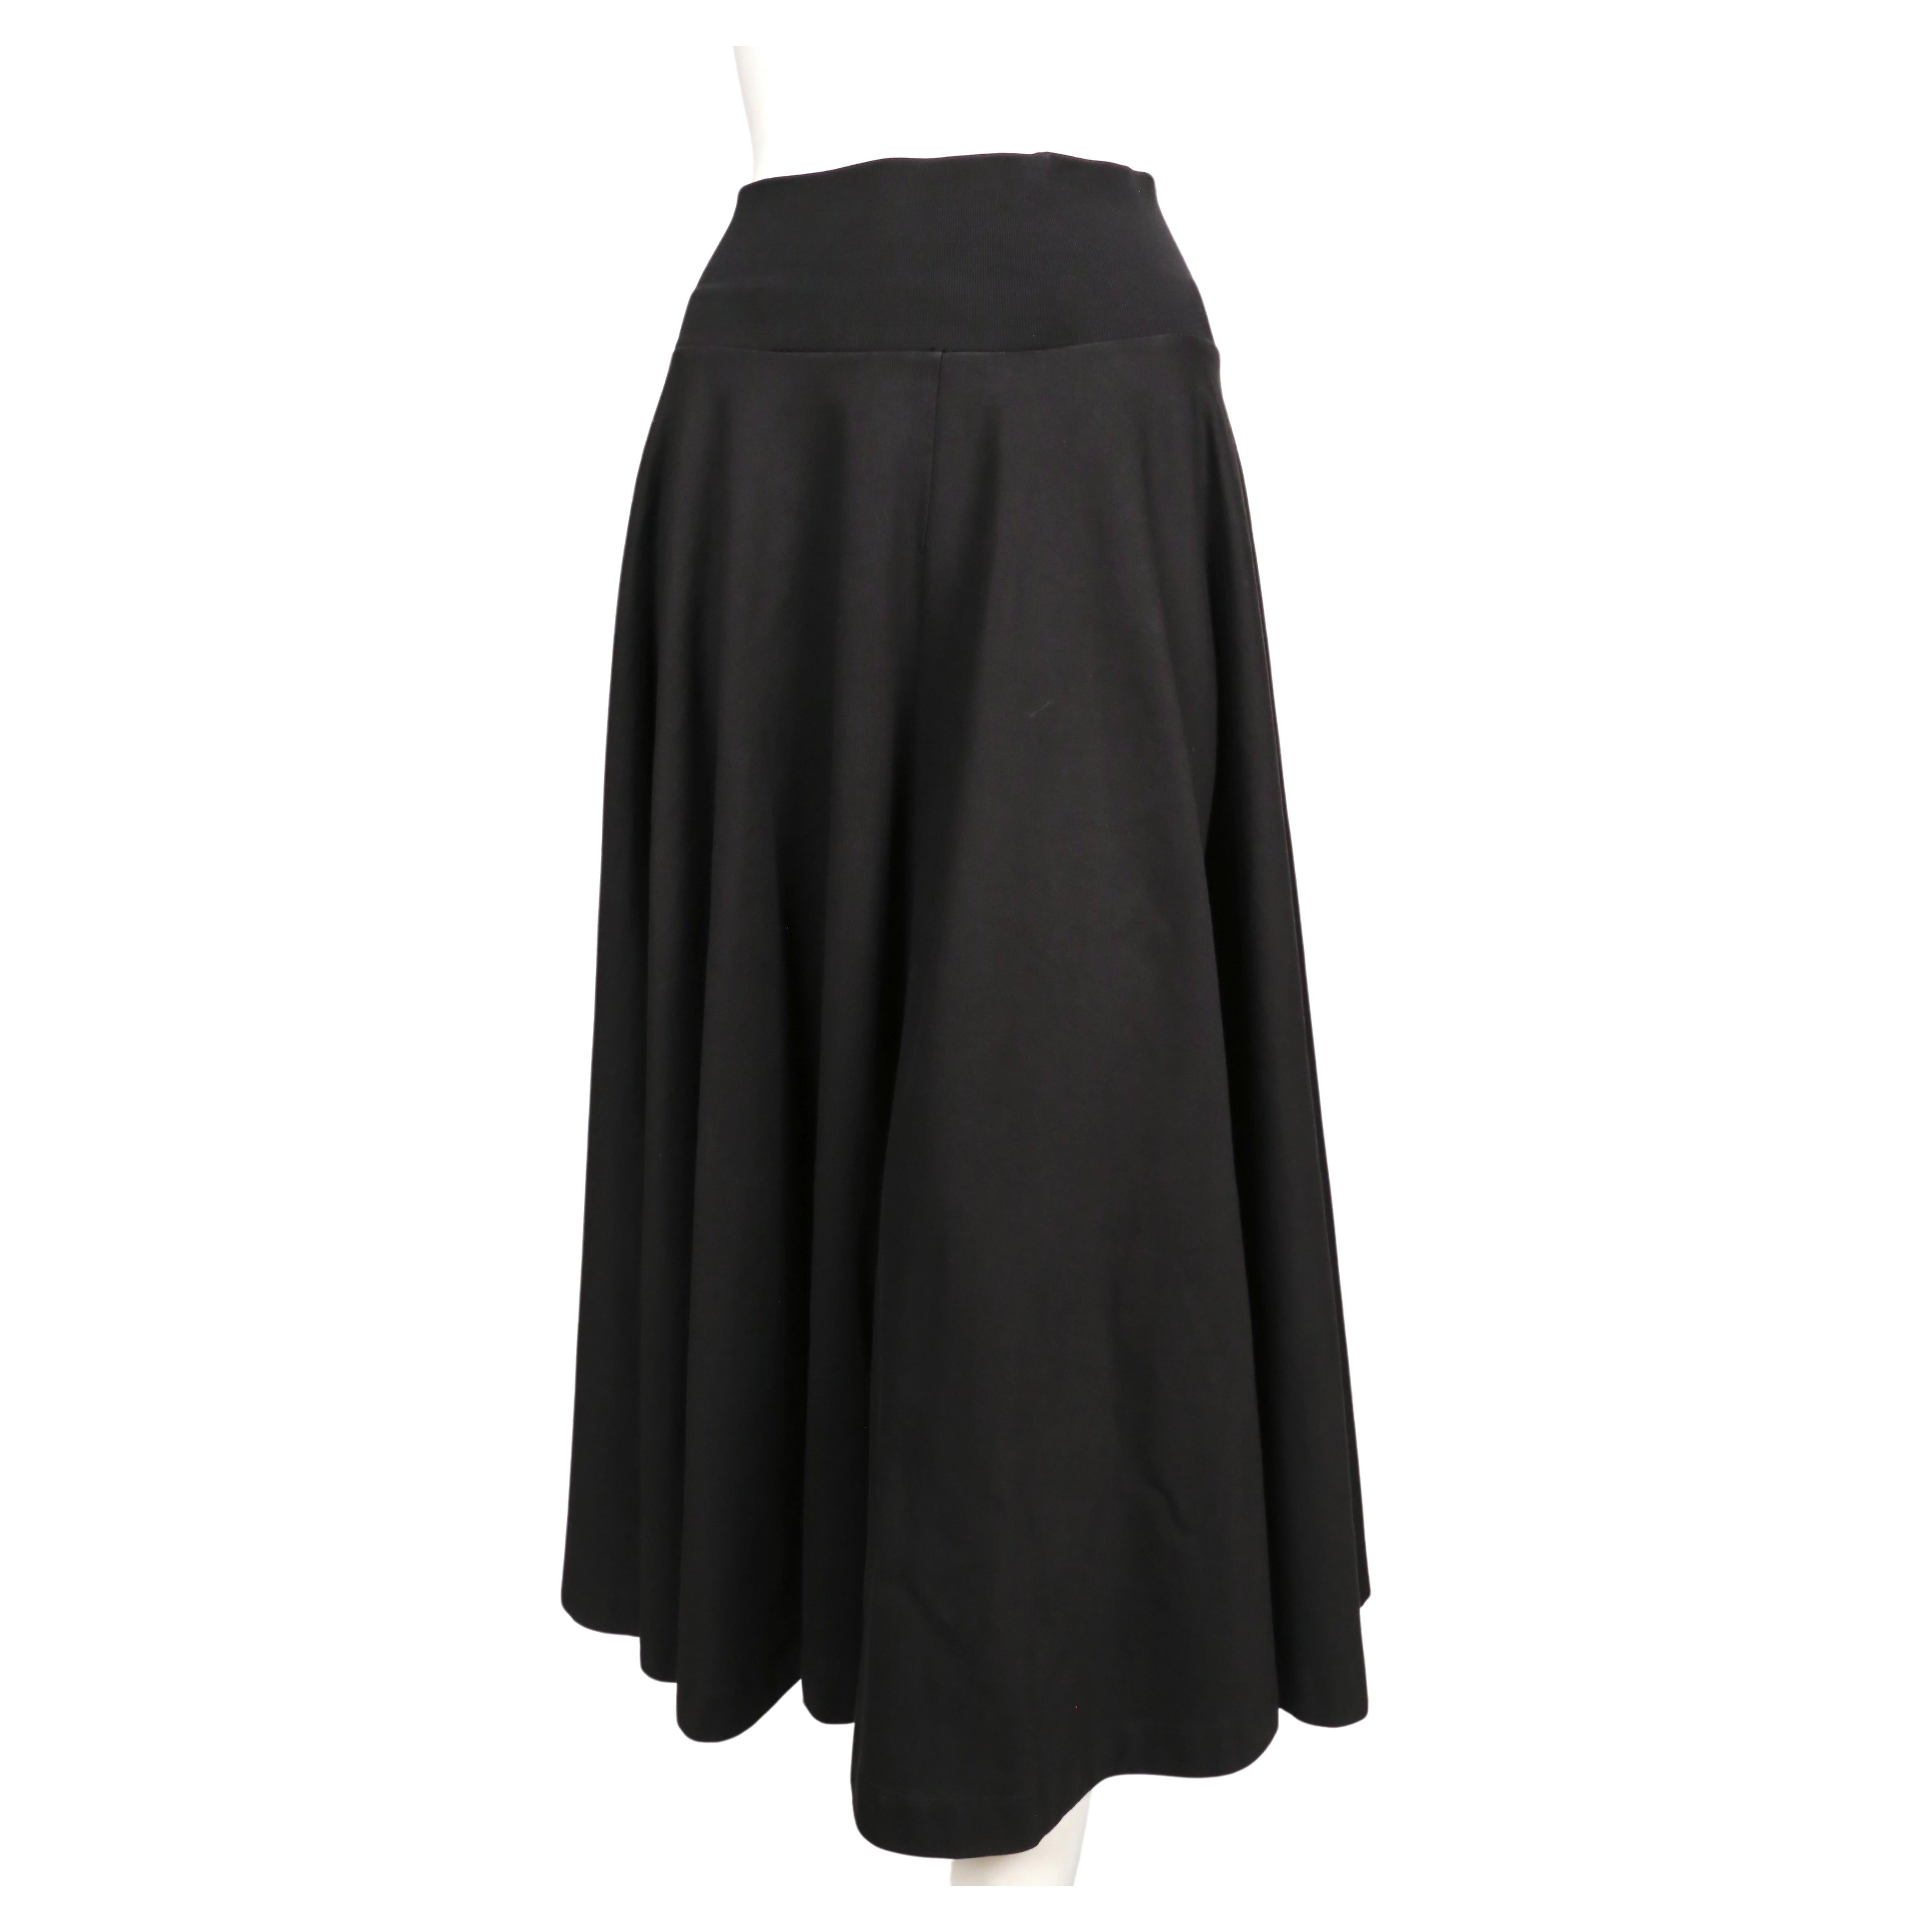 Black cotton twill circle skirt by Jil Sander dating to the 2000's. Size M. Skirt was not clipped on French size 36 mannequin. Approximate measurements: waist 26.5